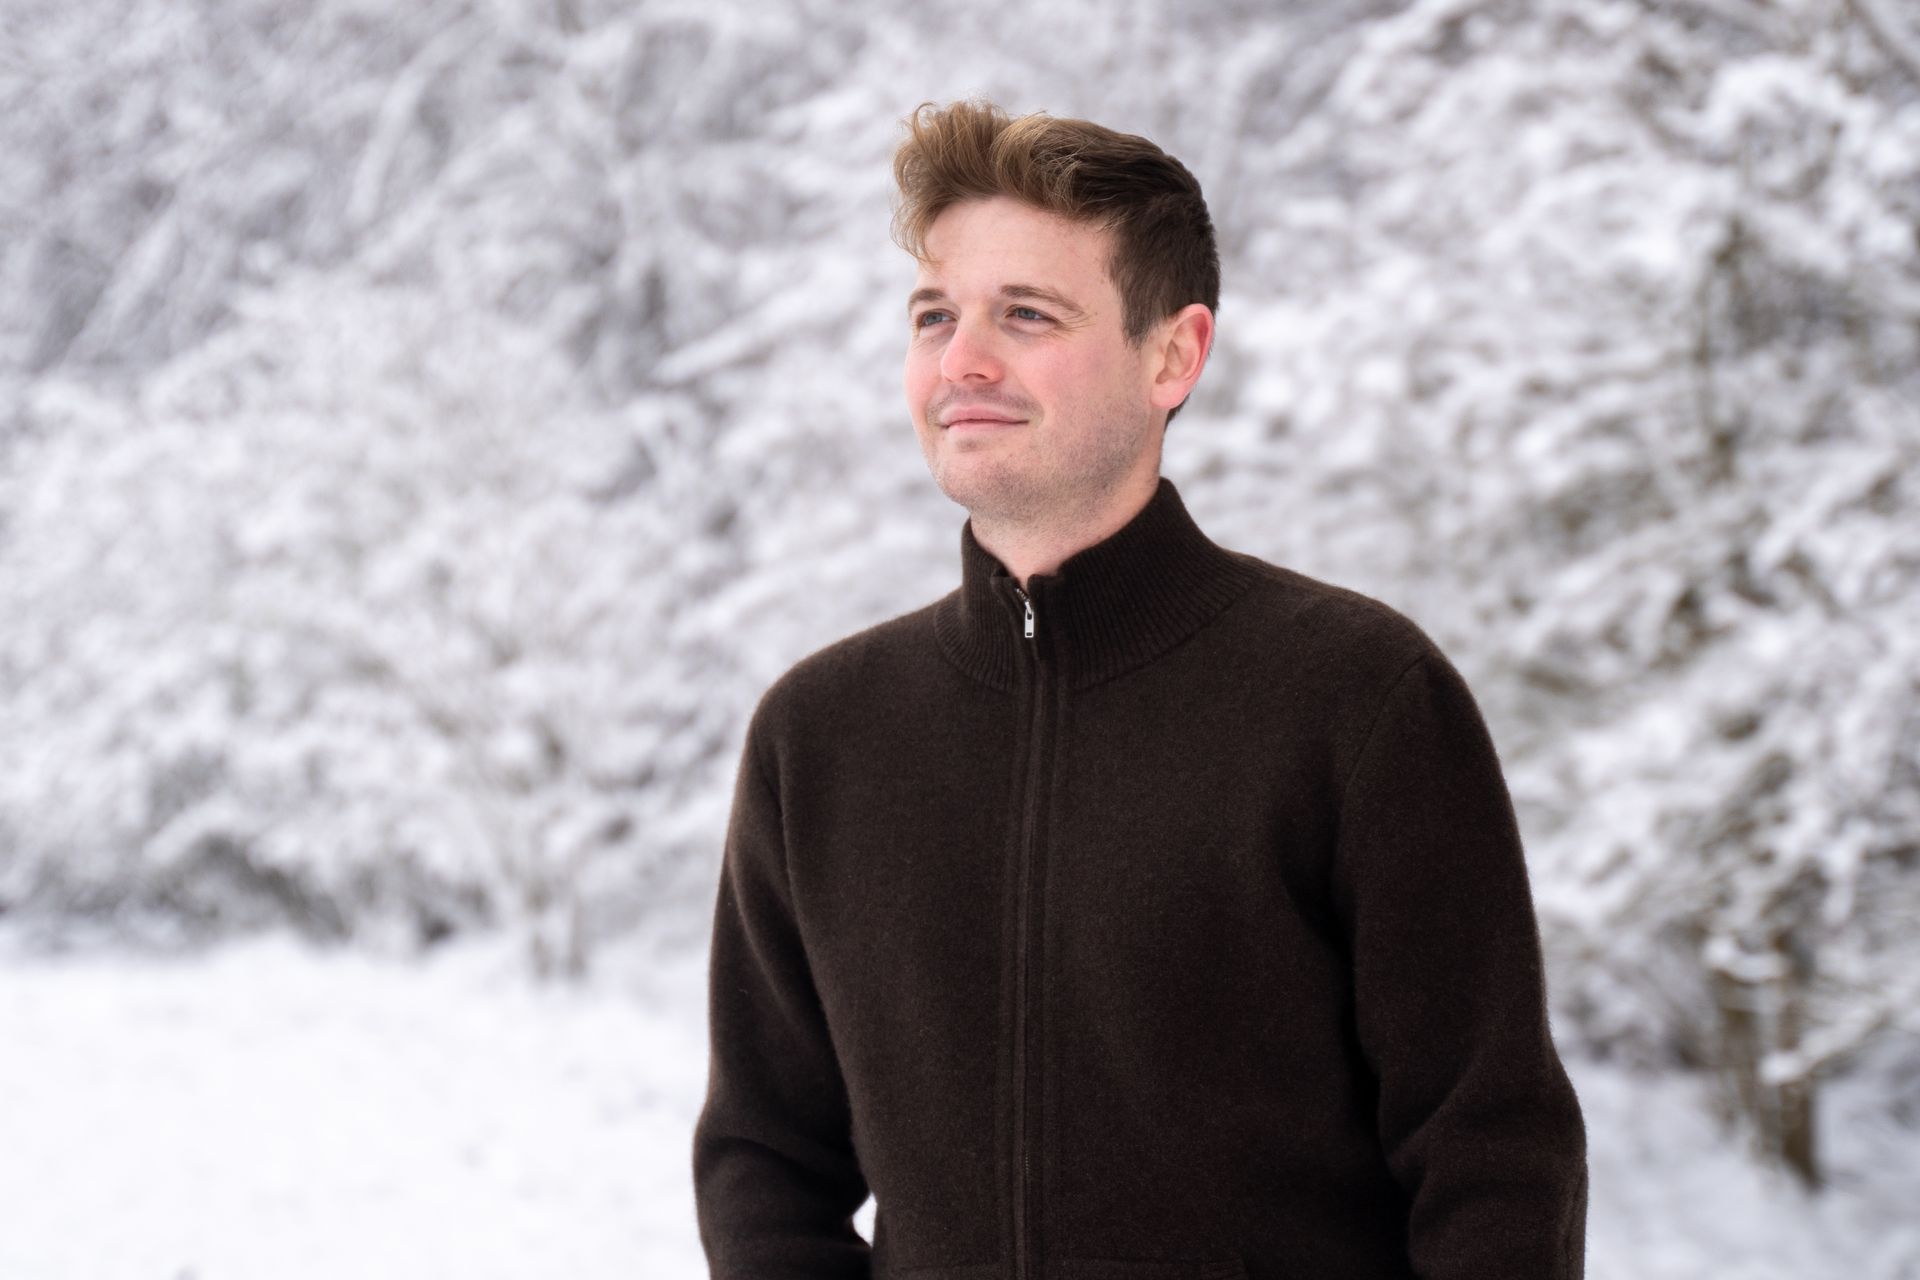 Young man in a dark cardigan stands in front of a snow-covered forest